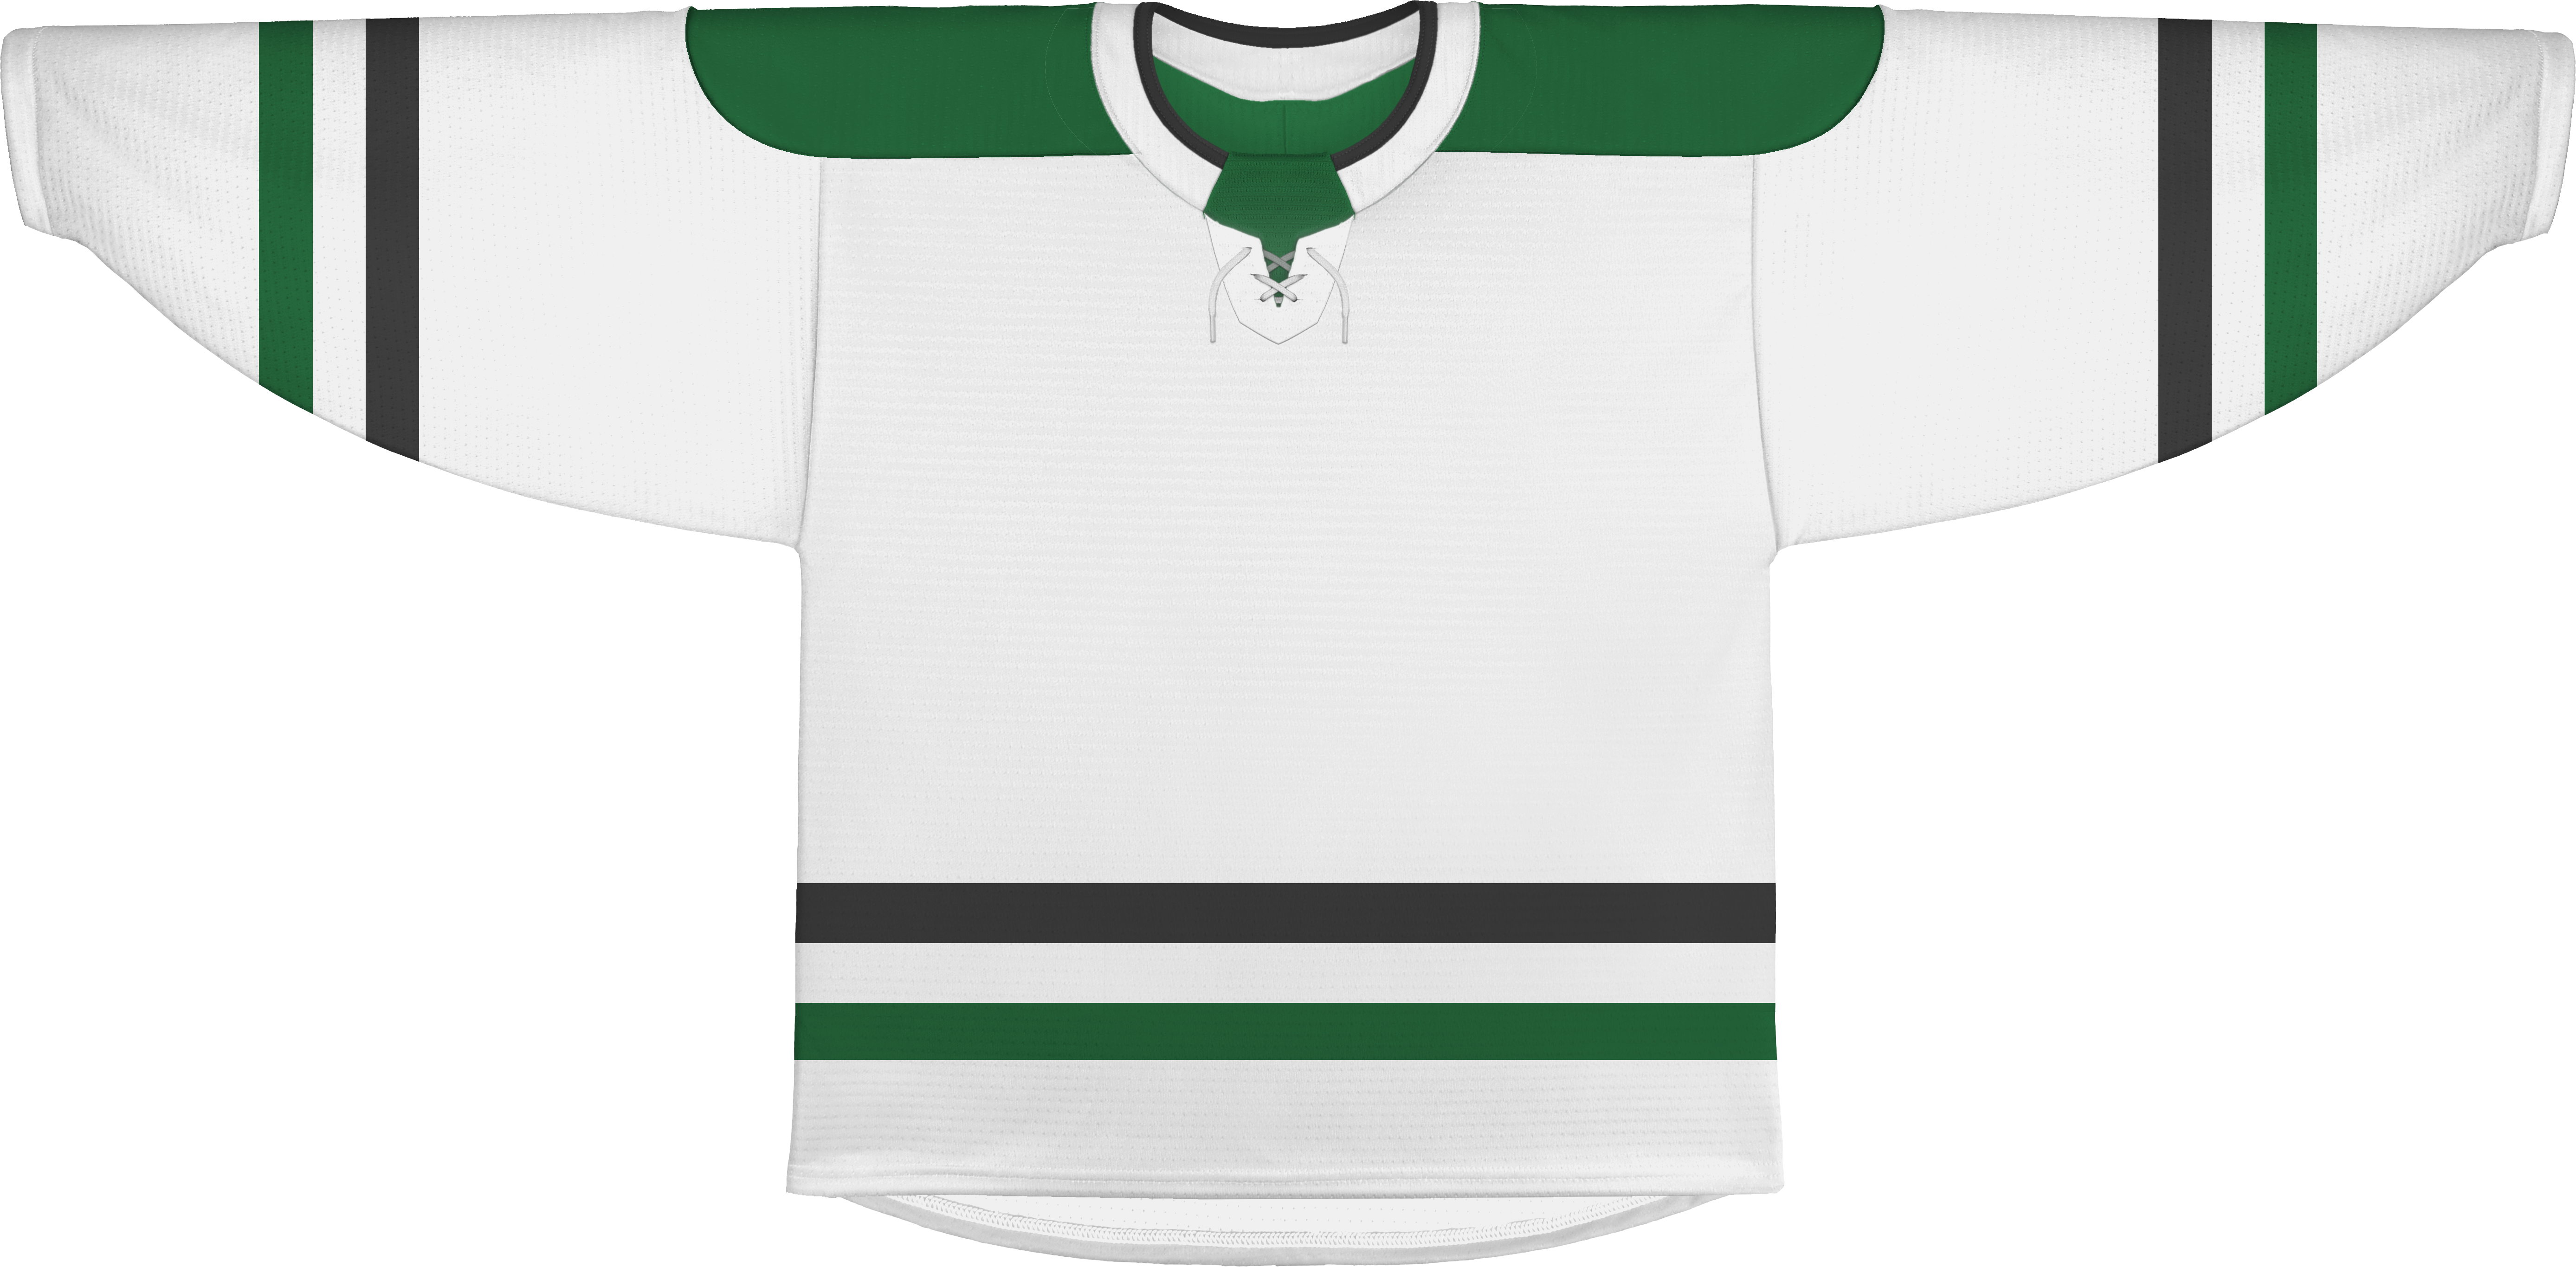 ALTERNATE A OFFICIAL PATCH FOR DALLAS STARS AWAY 2013-PRESENT JERSEY –  Hockey Authentic